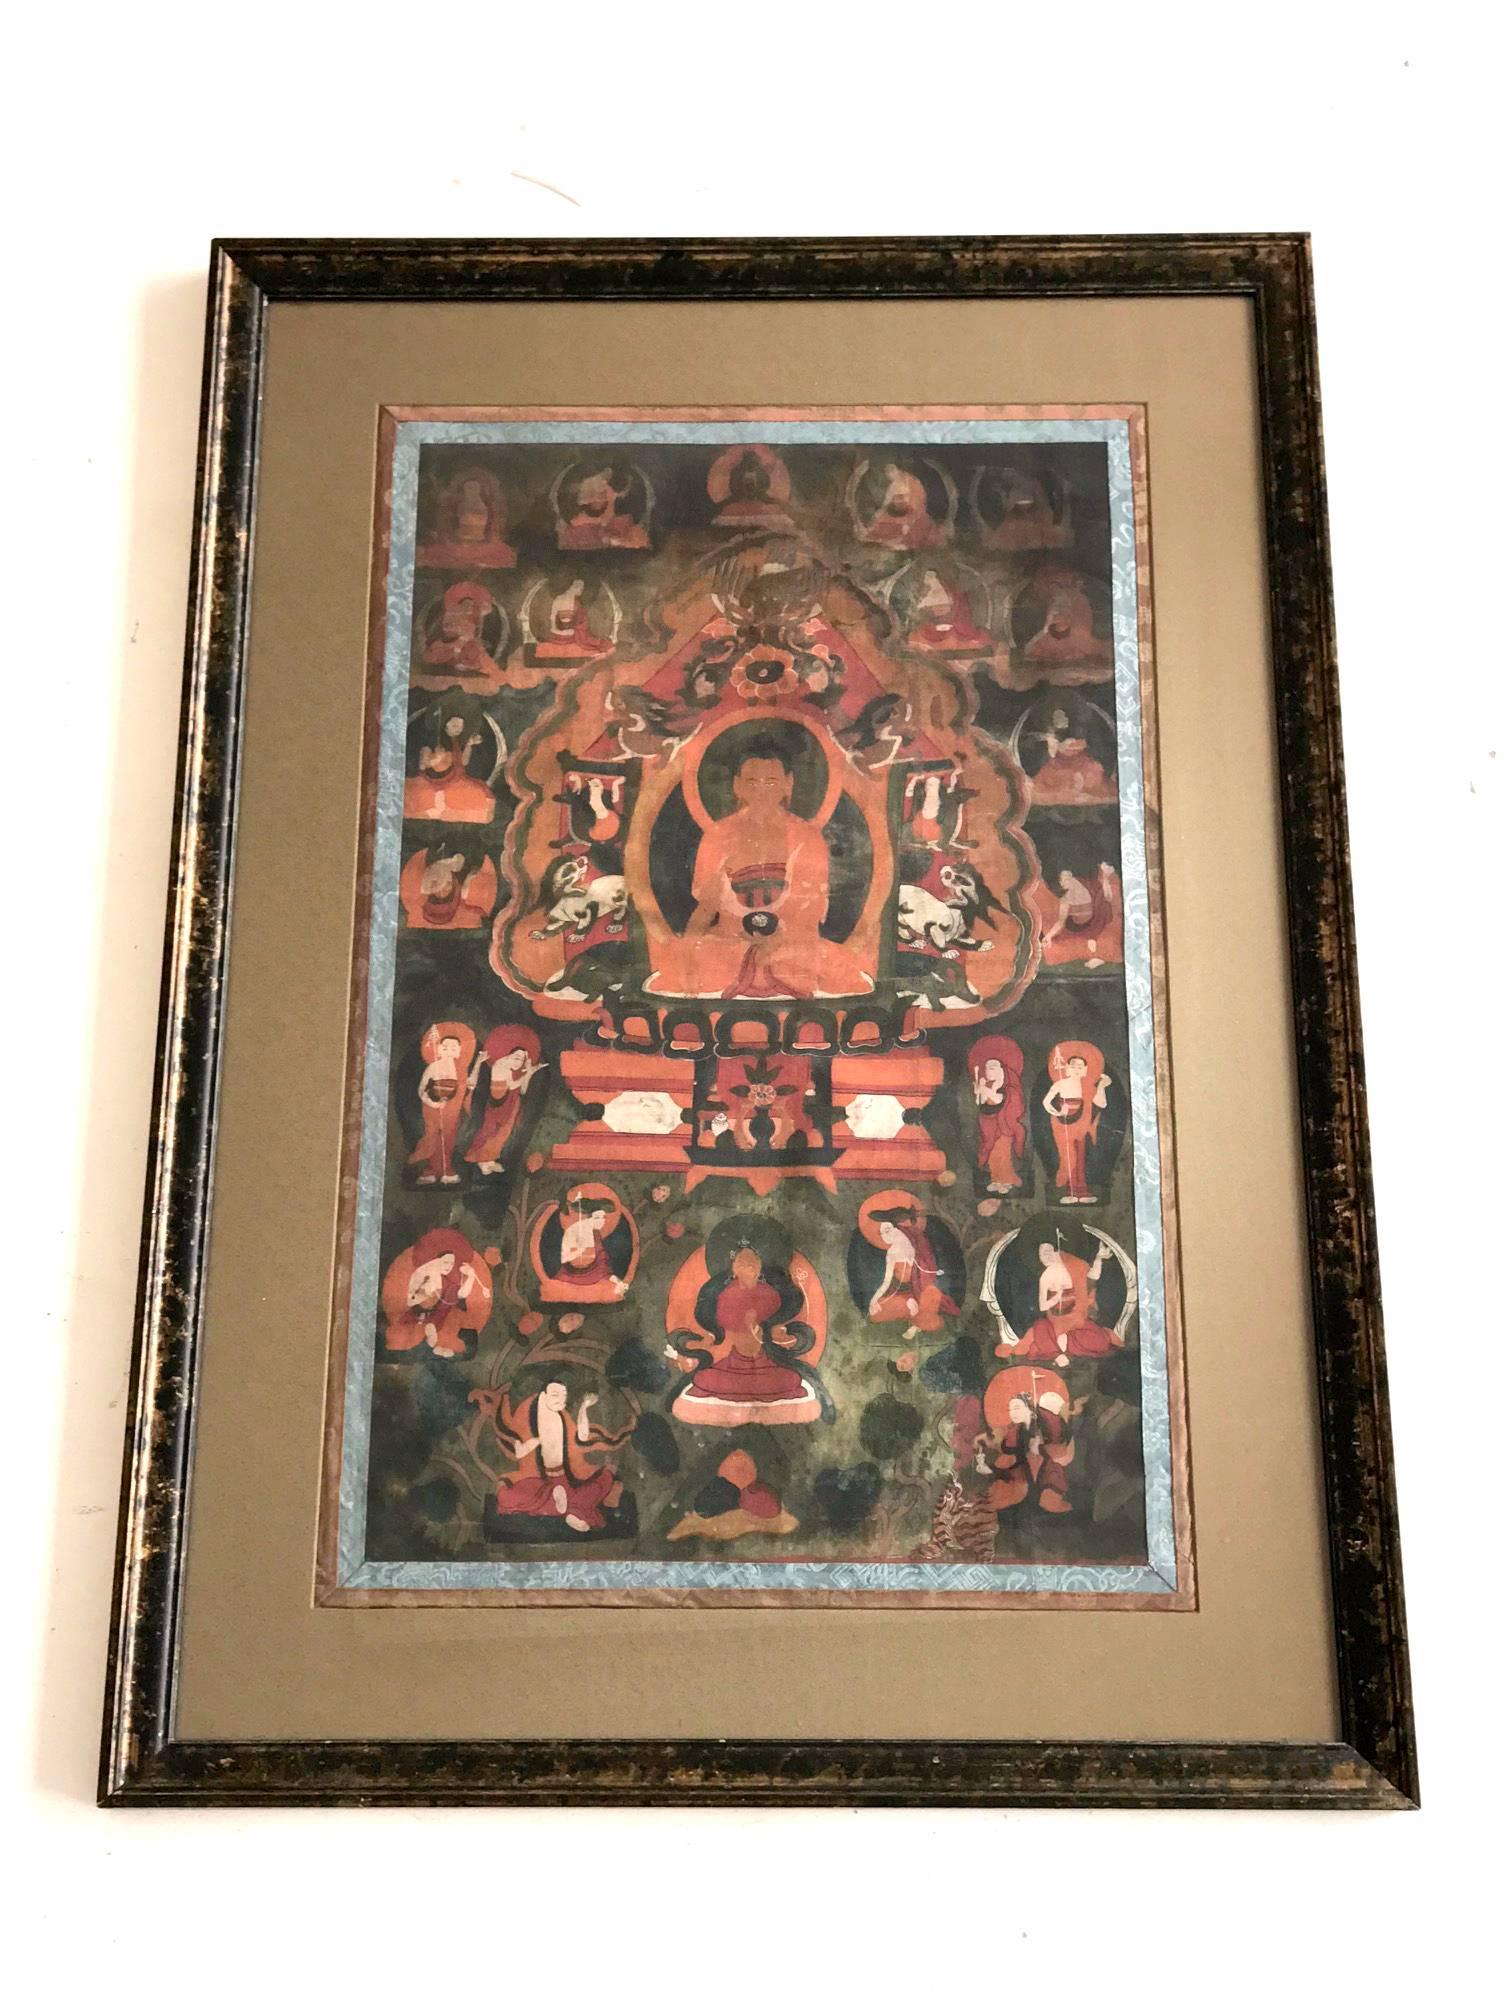 An antique Tibetan Thankga depicting Amitabha and surrounding deities, circa late 19th century. The center Amitabha is in a meditation form holding a black beggar's bowl. In the Mahayana Tradition of Buddhism, Amitabha is a celestial Buddha: the